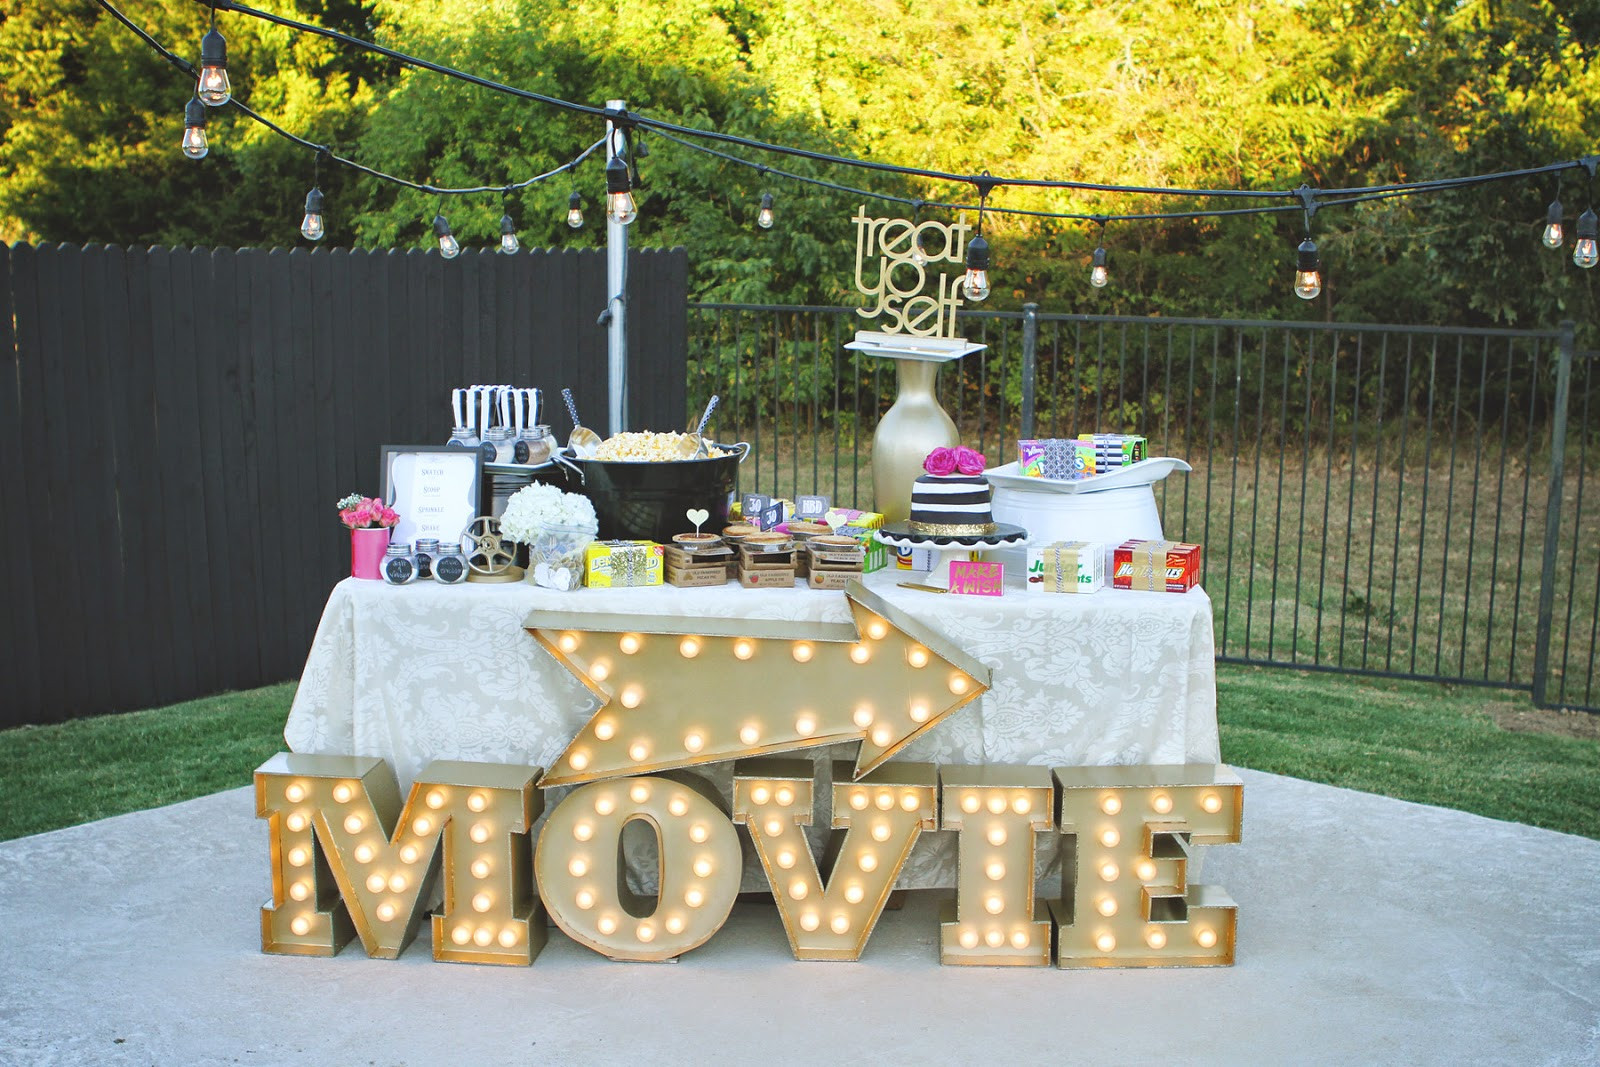 Backyard Party Ideas For Teenagers
 PB J Babes Movie Night Under the Stars